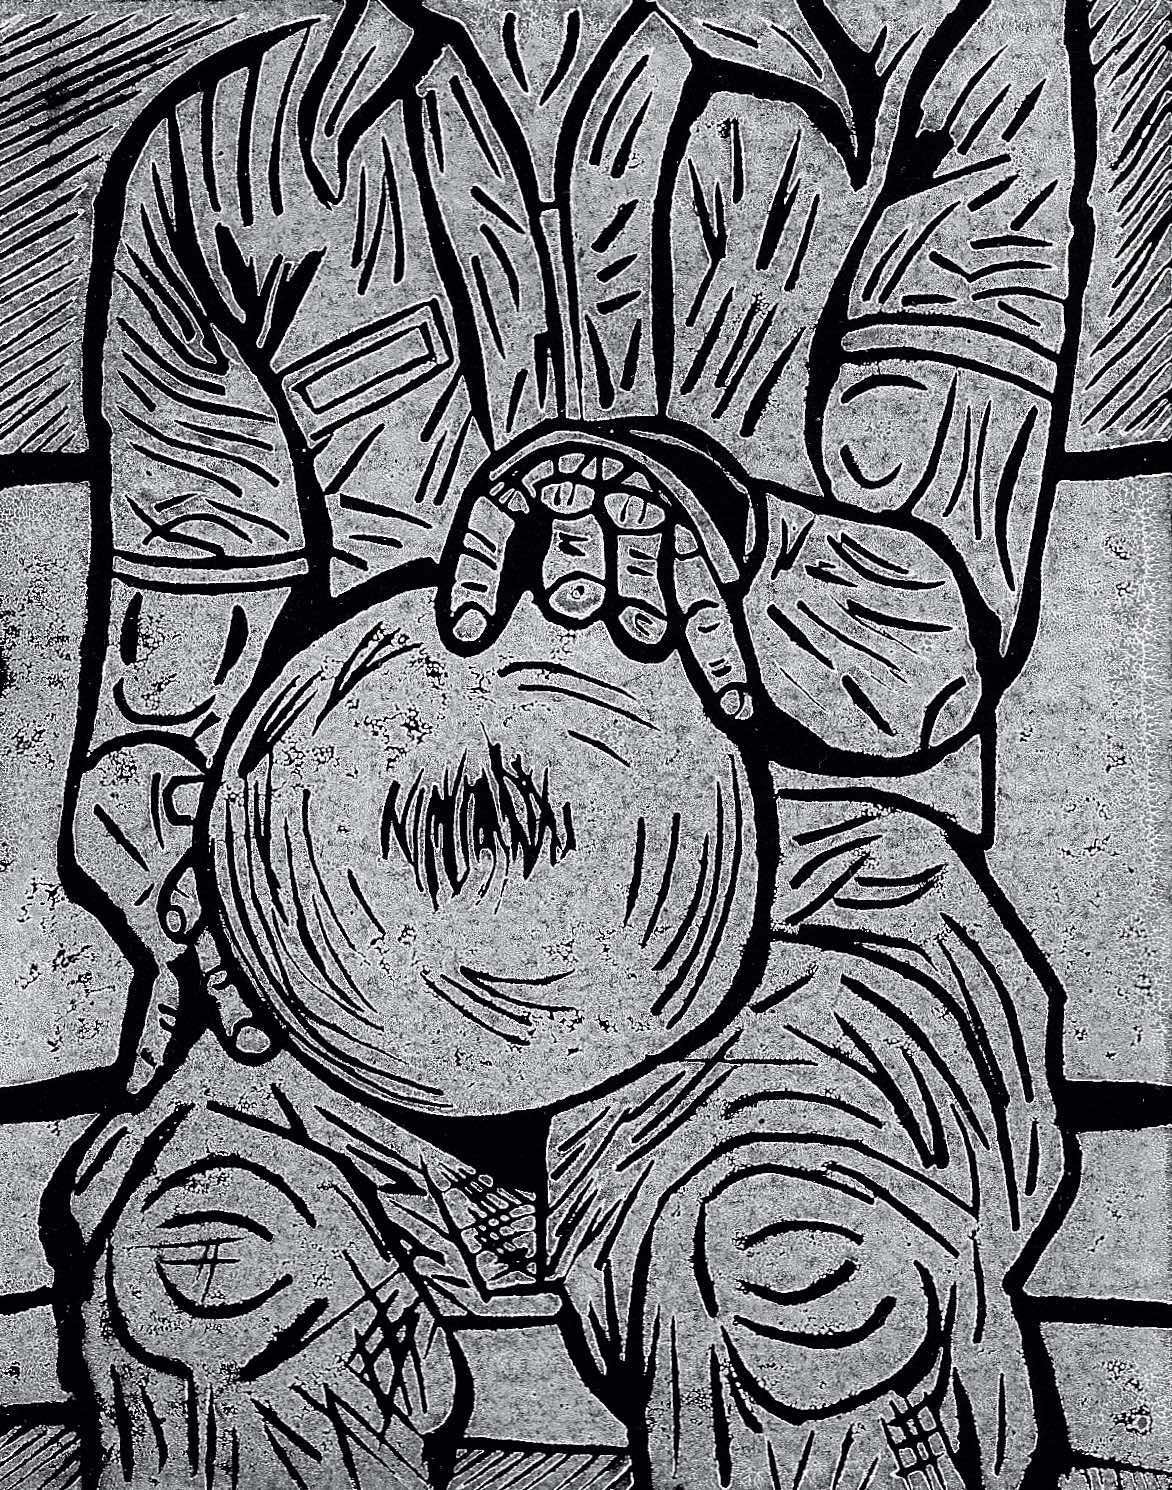 Block print of a man holding a bowling ball by Charly Fasano.